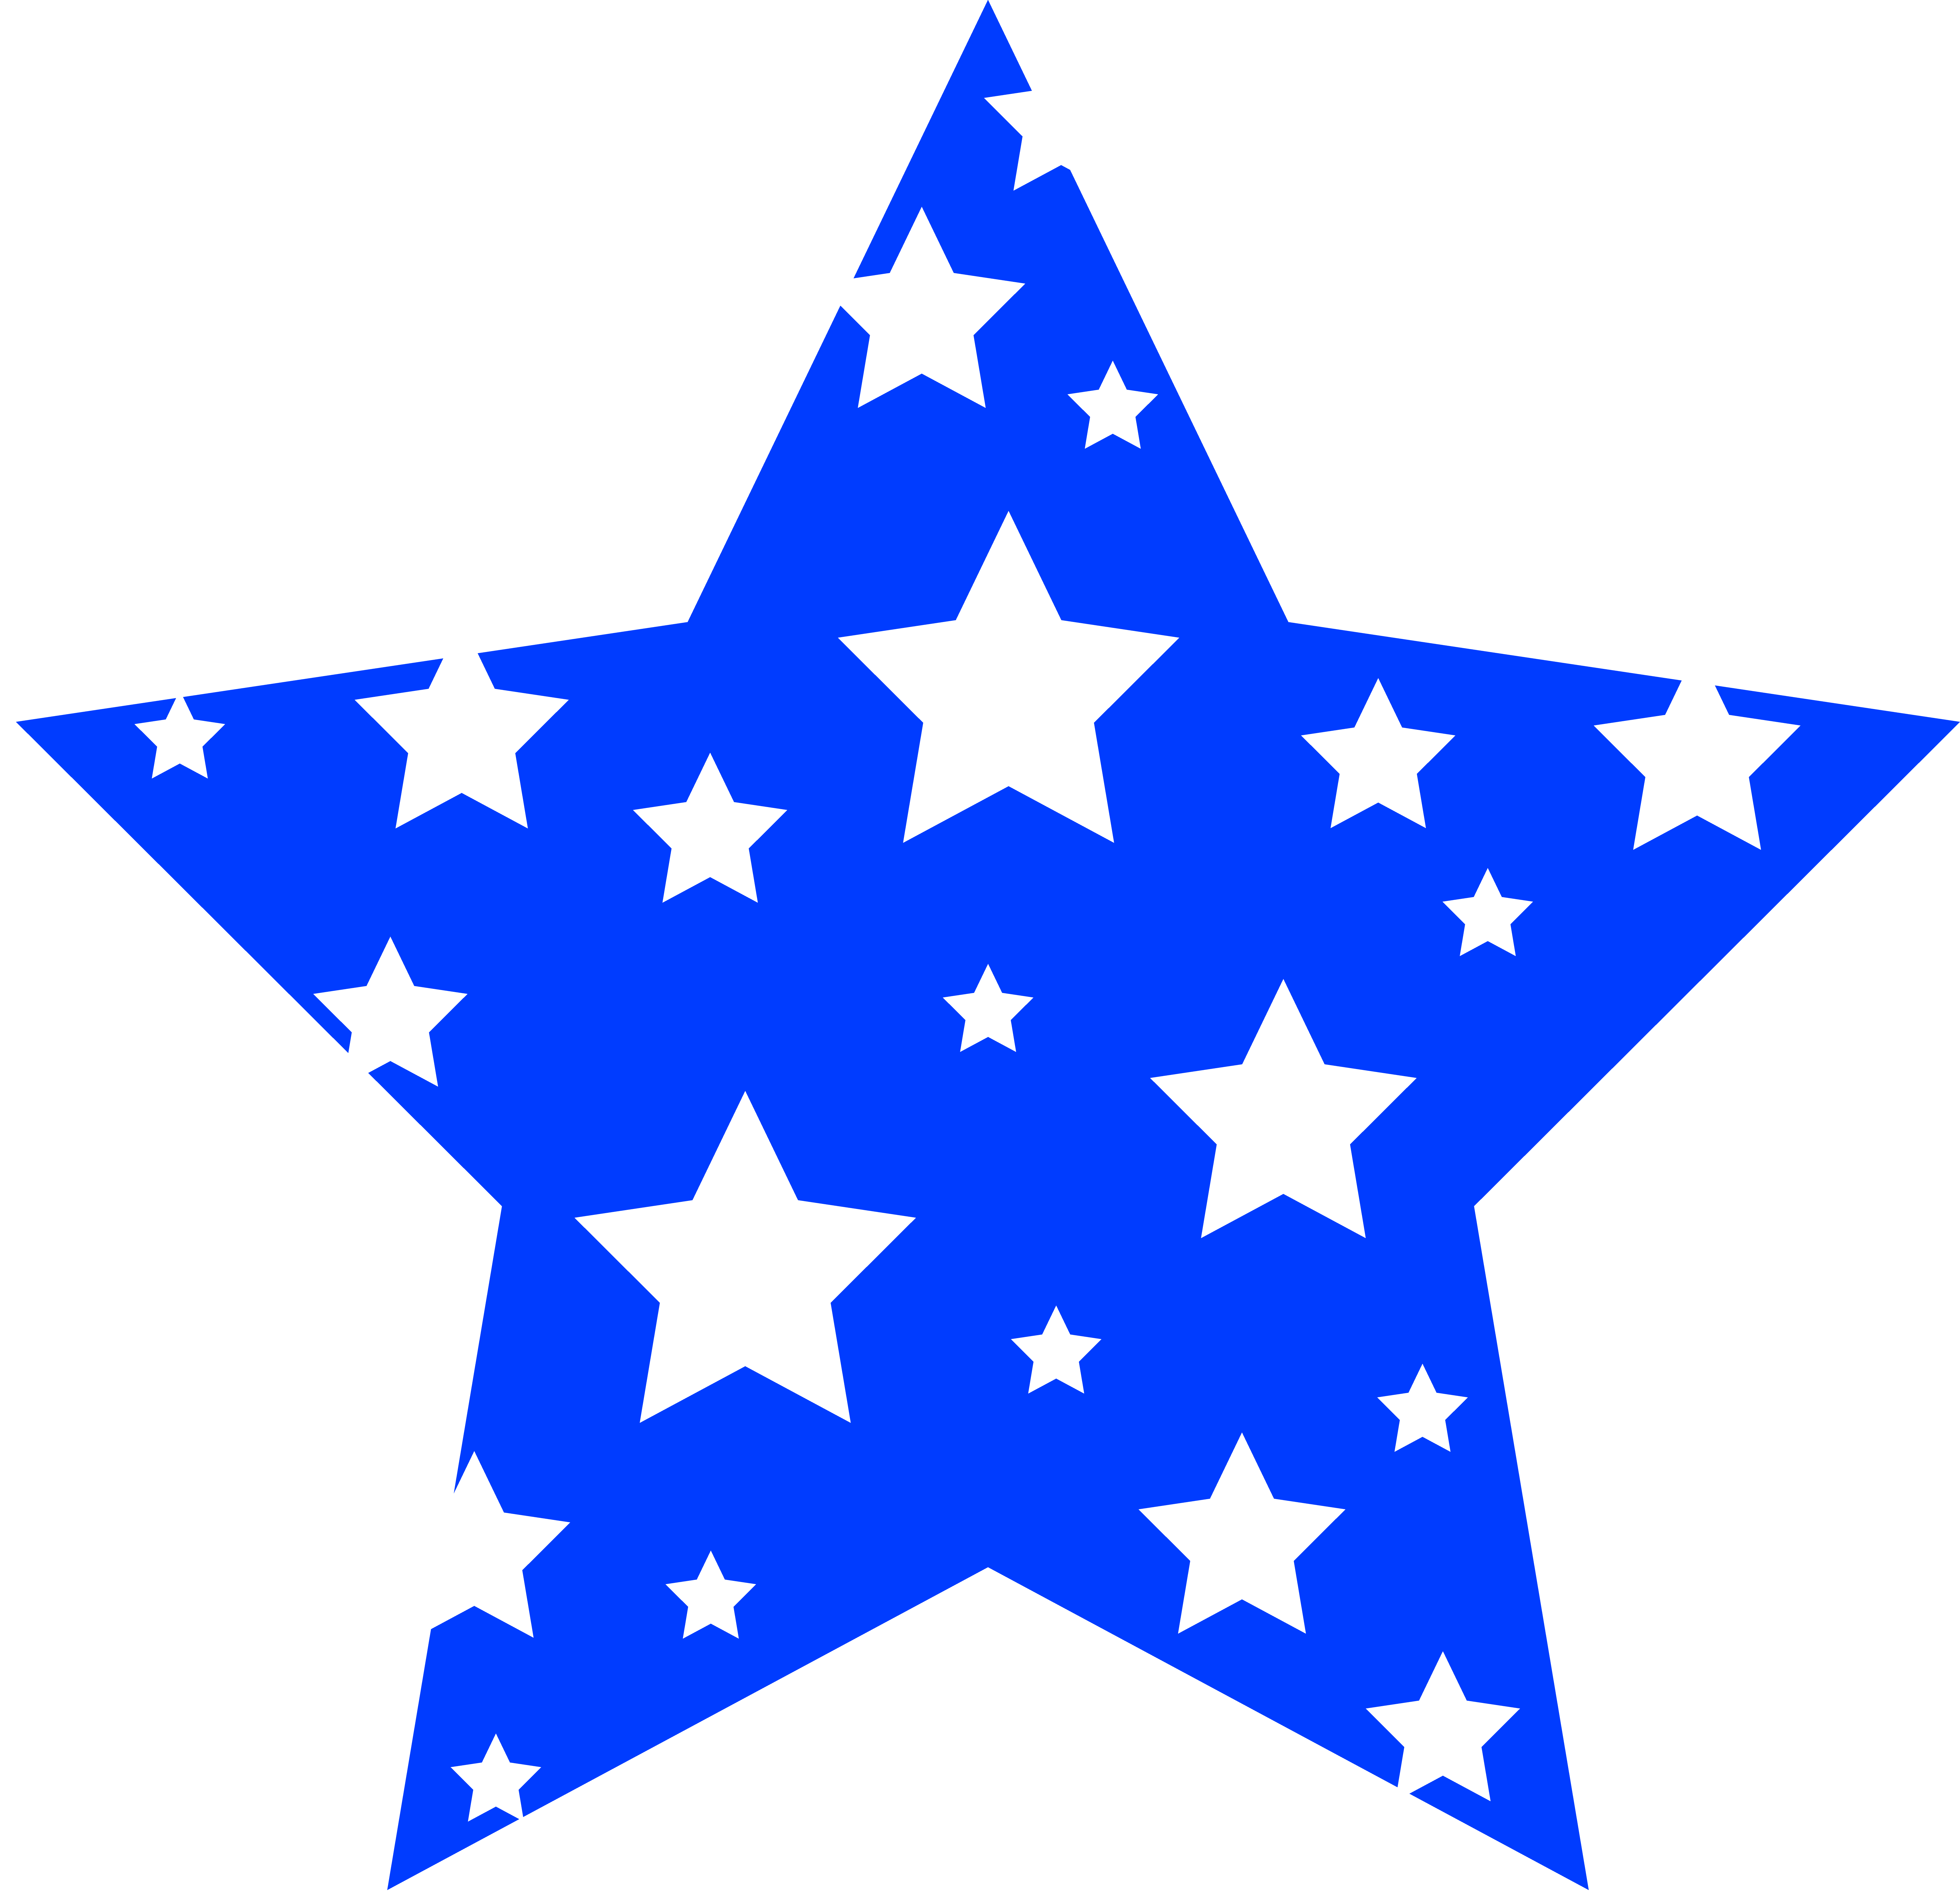 White Stars Clipart | Clipart Panda - Free Clipart Images